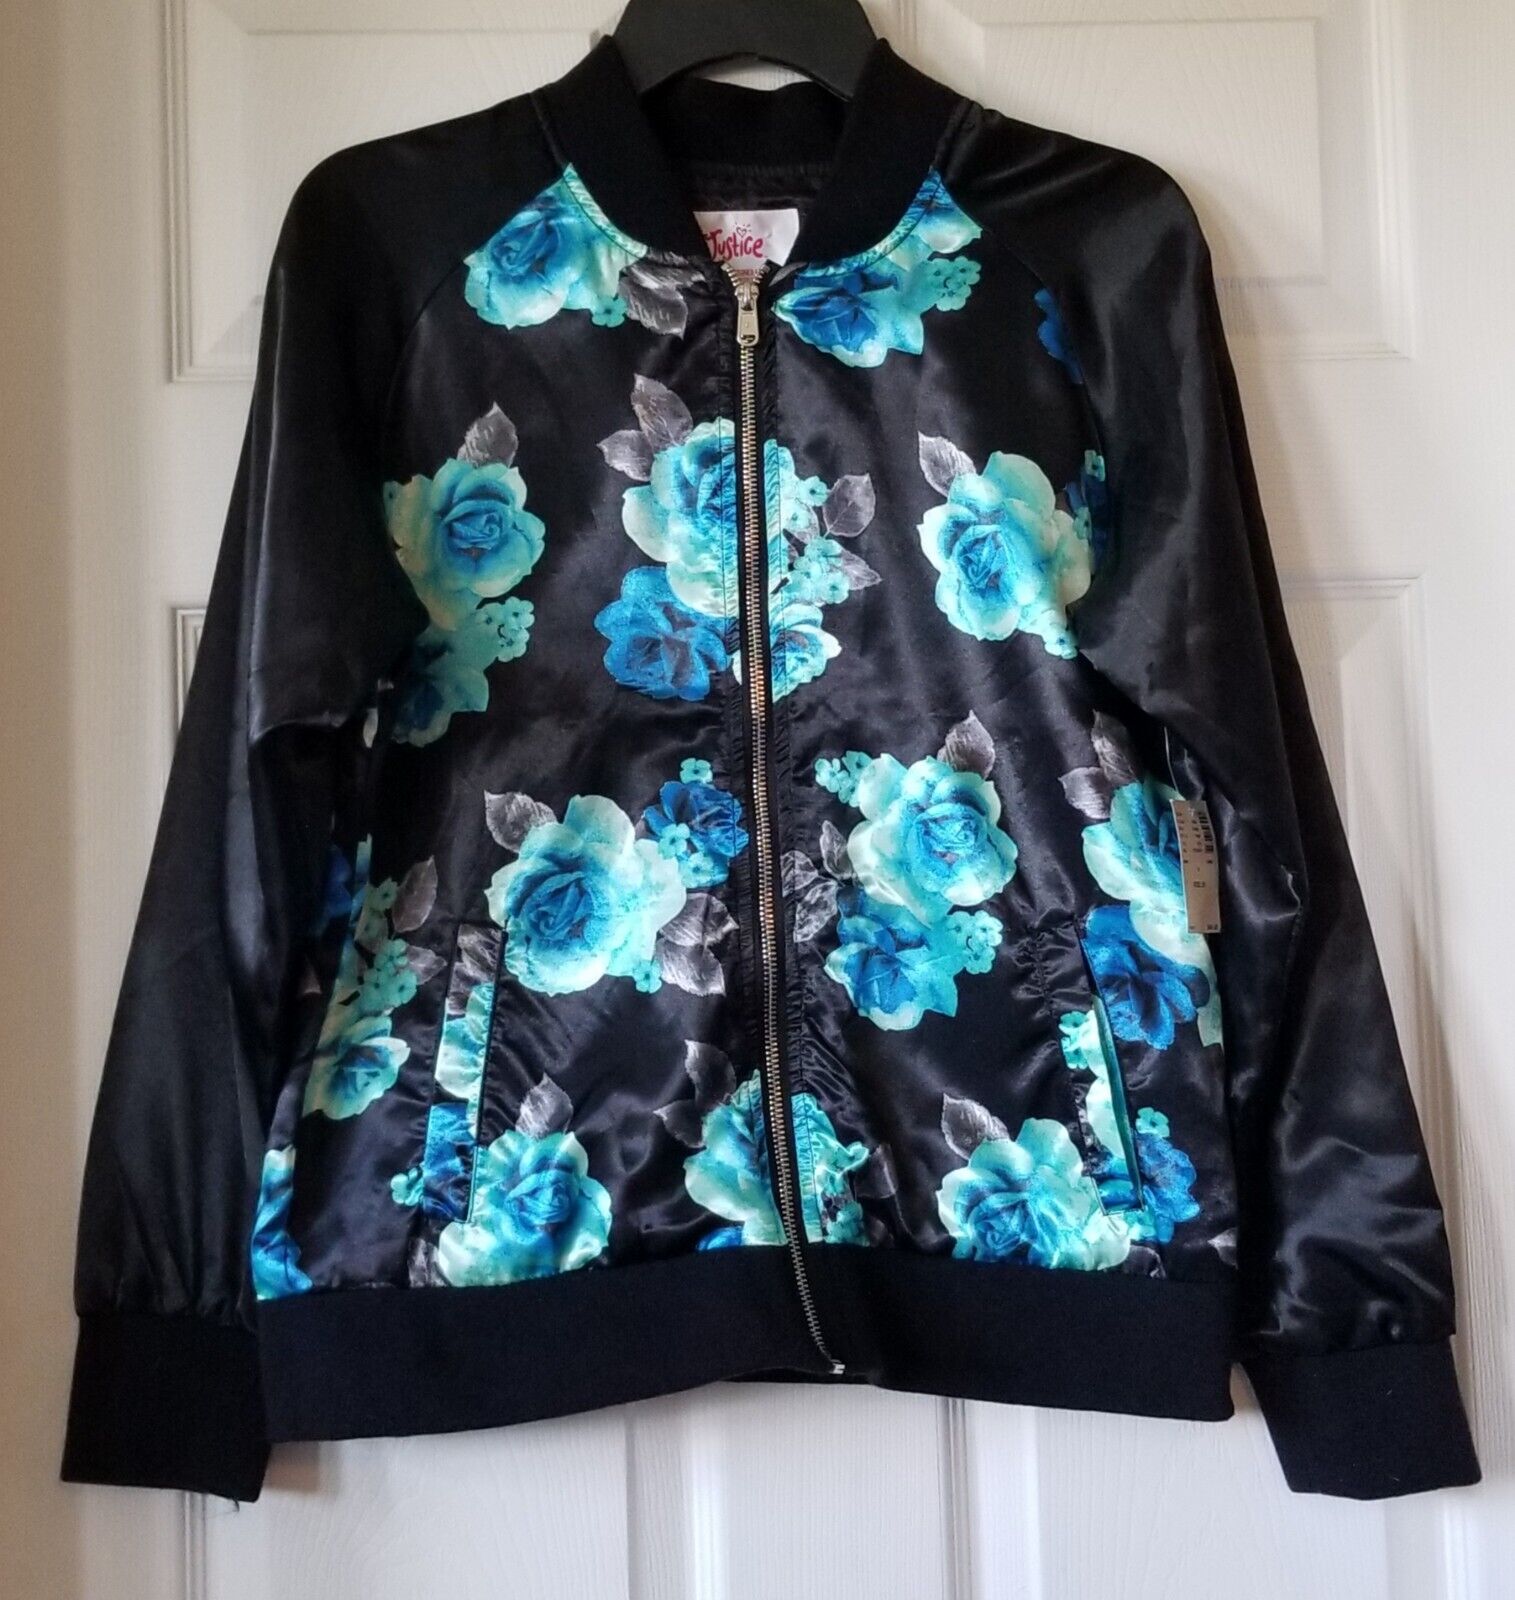 JUSTICE Girls Black and Teal Floral Satin Zip Front Bomber Jacket Size 20 - NWT Justice